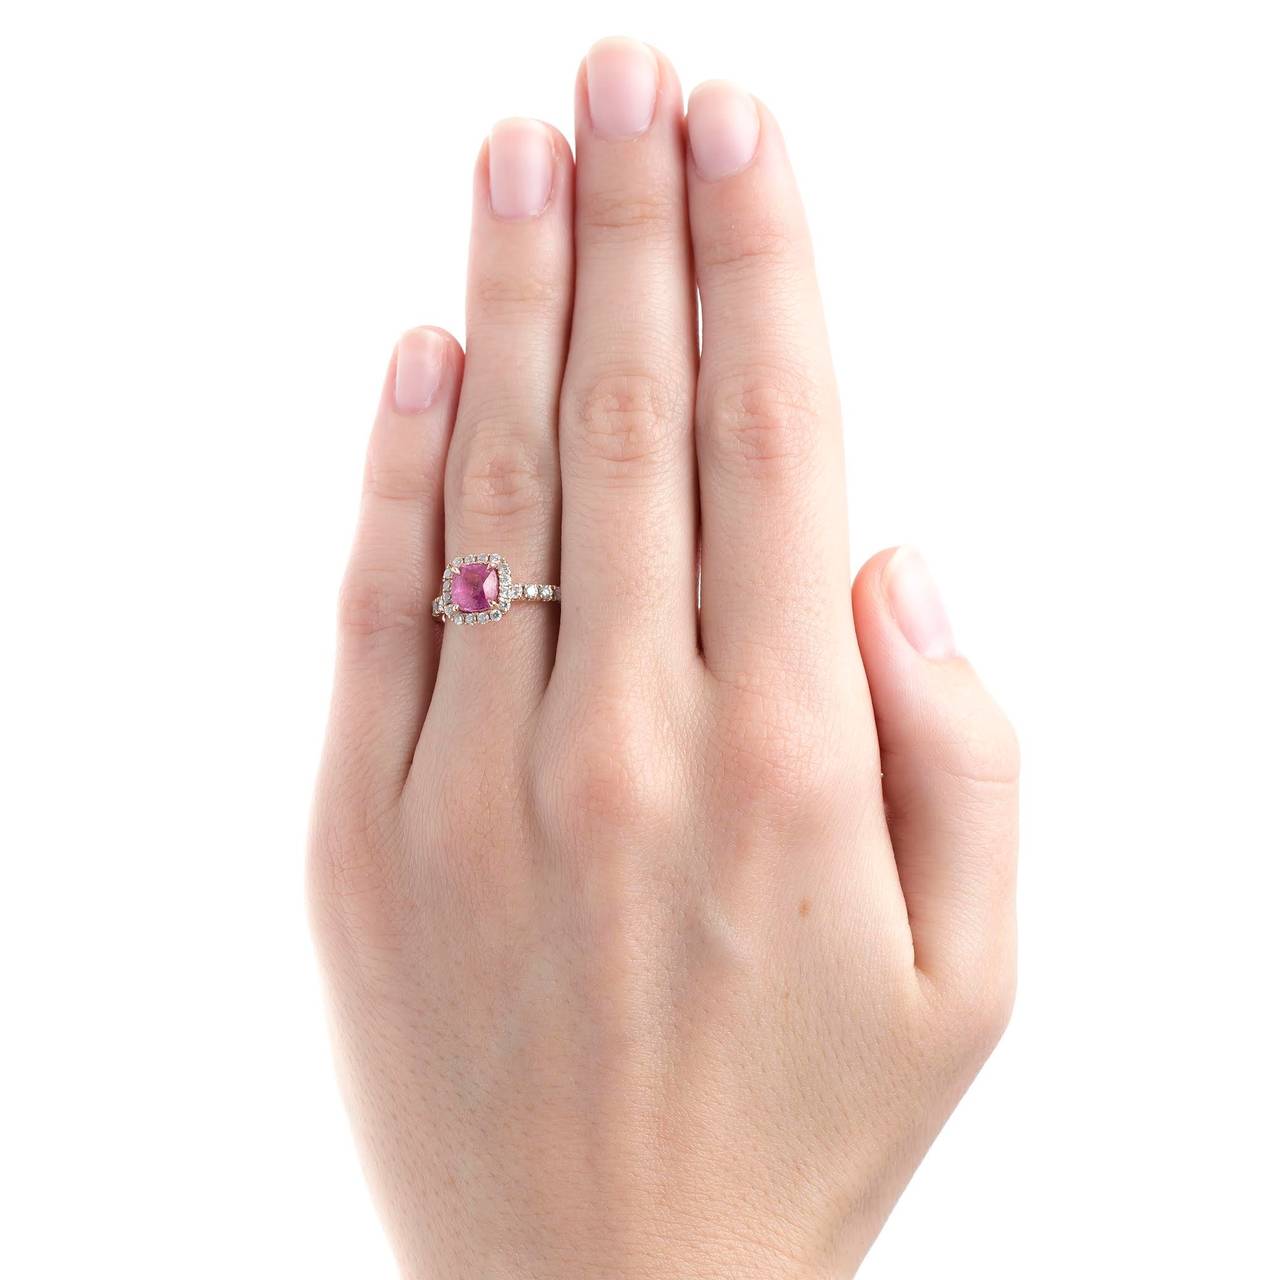 Eureka Springs is a contemporary (circa 2005) halo engagement ring made from 14k rose gold centering a 1.29ct natural cushion shaped pink sapphire. This bubblegum pink sapphire is perfectly nestled within a halo of twenty-eight bright white micro